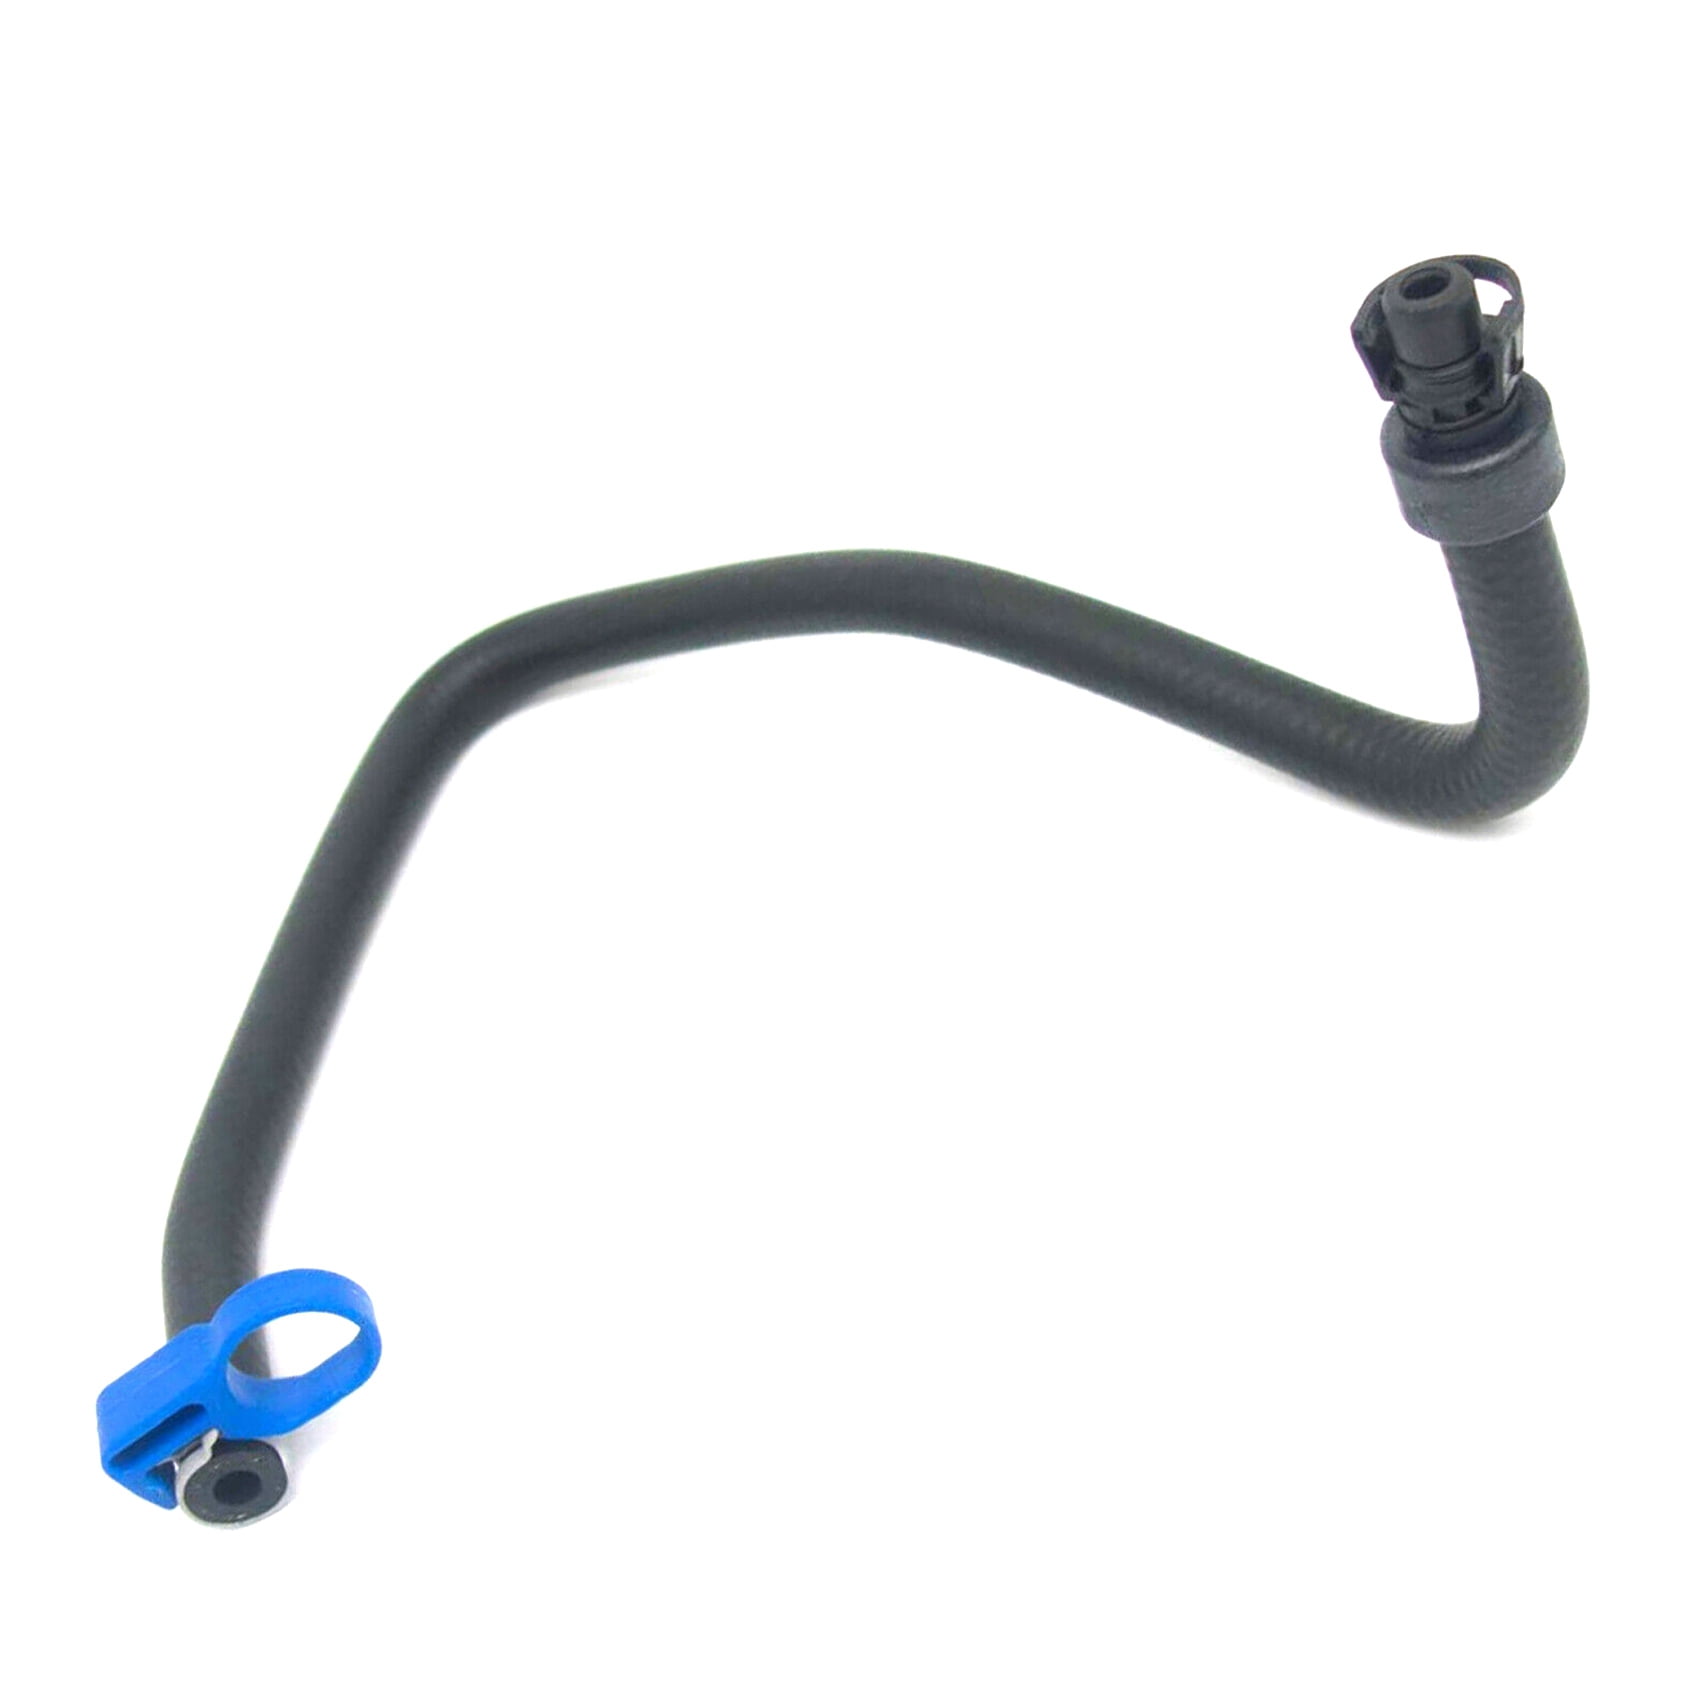 labwork Radiator Upper Inlet Coolant Bypass Hose for Chevy Cruze 1.4L 2011 2012 2013 2014 2015 2016 